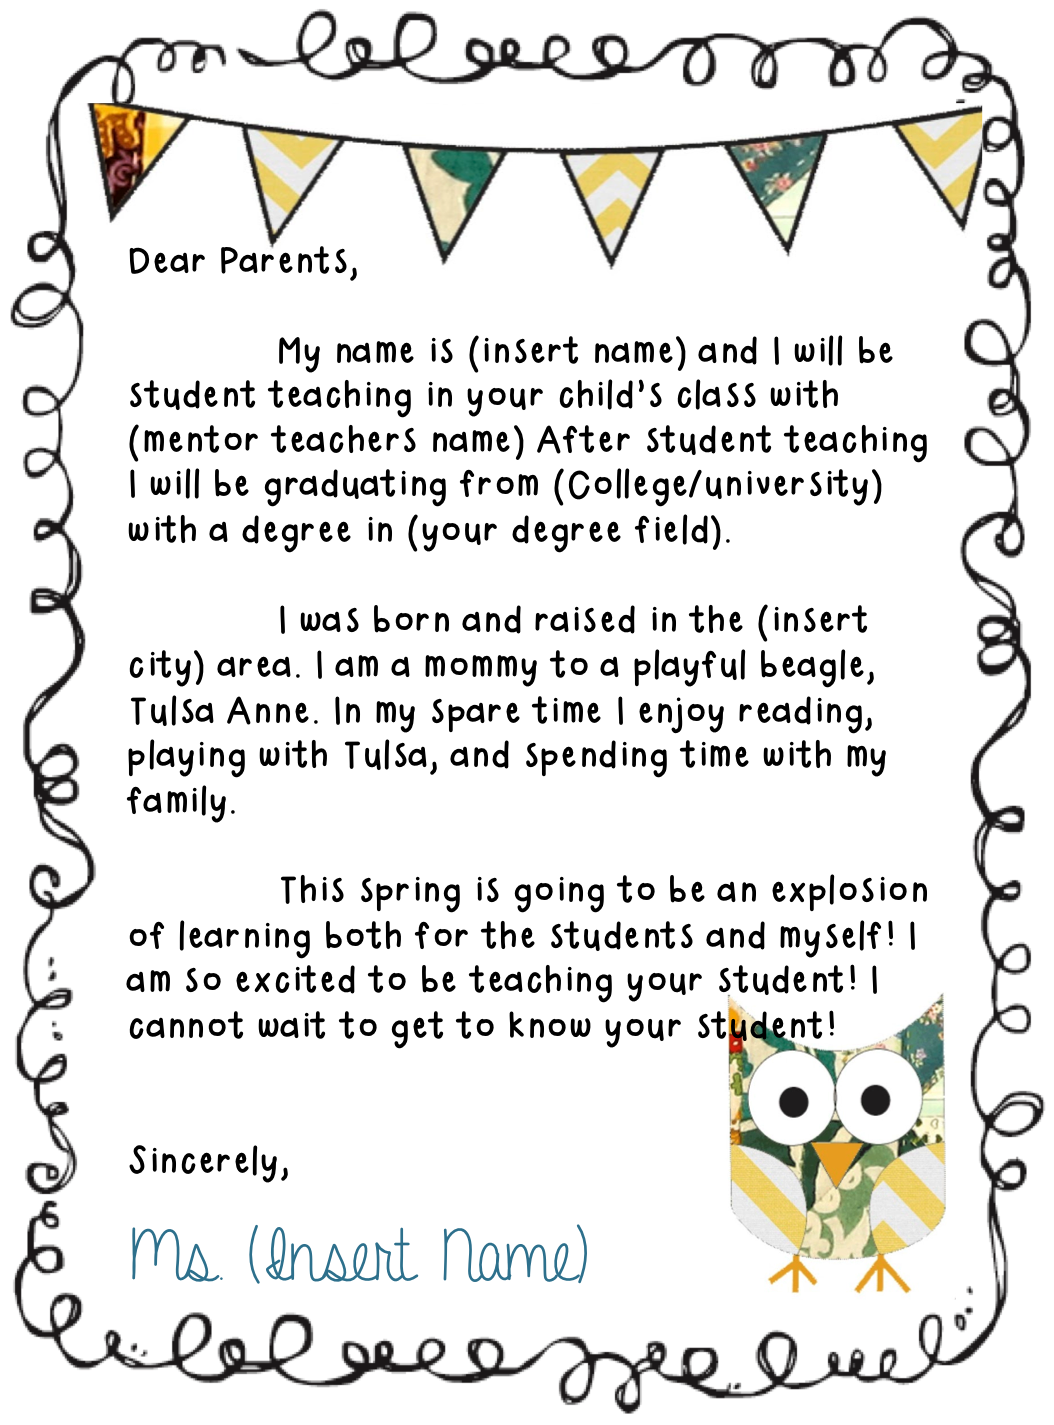 Free template for student teaching/teaching letter!! Go to